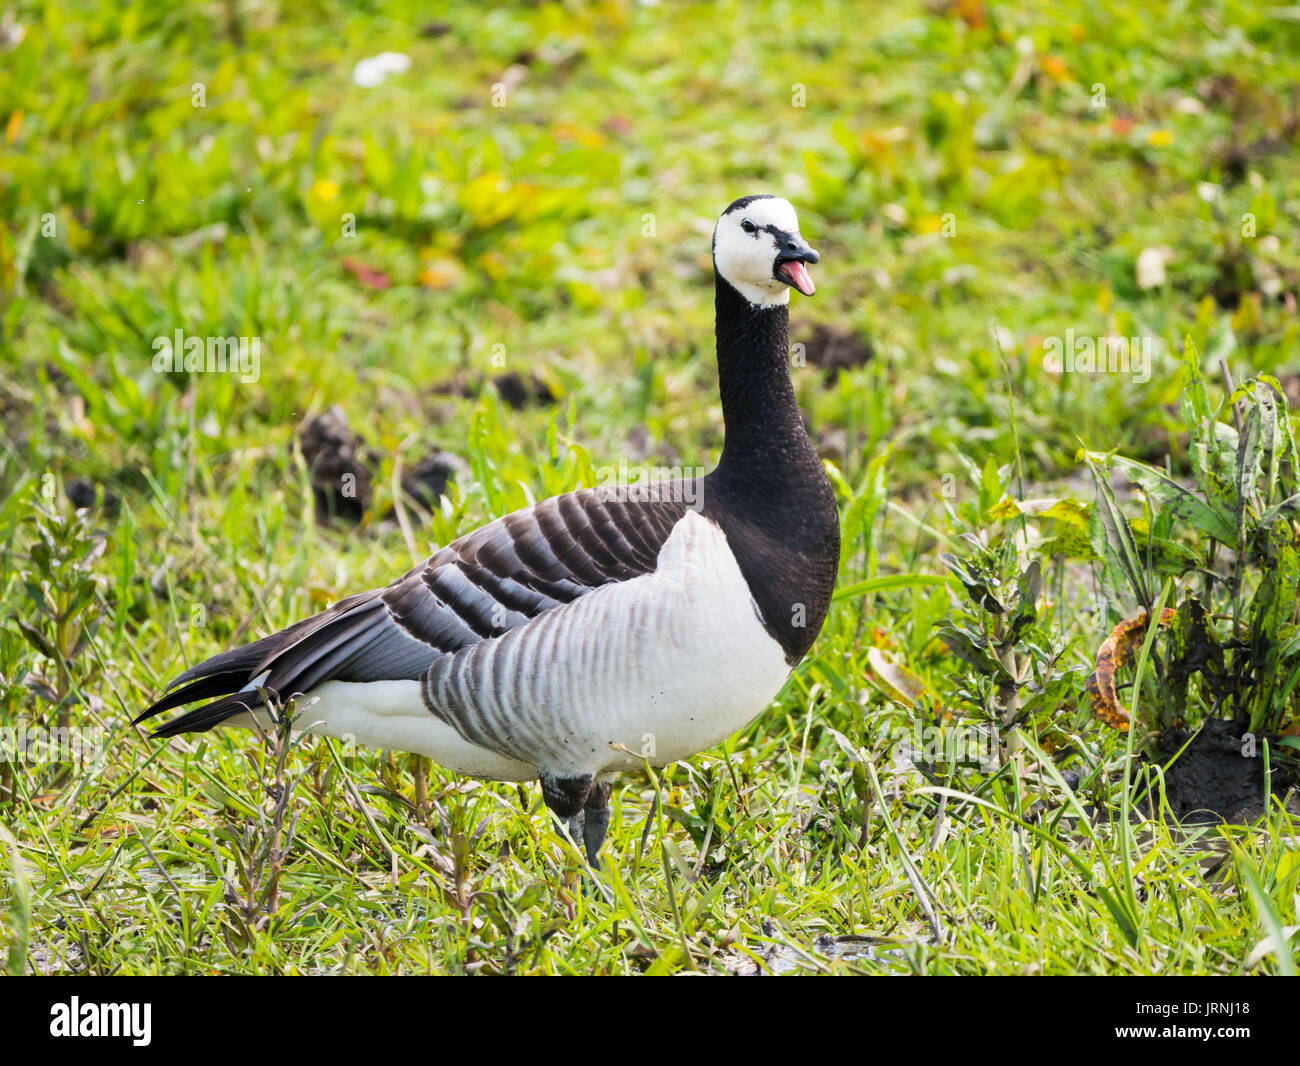 Portret of adult barnacle goose, Branta leucopsis standing in field with open mouth honking Stock Photo